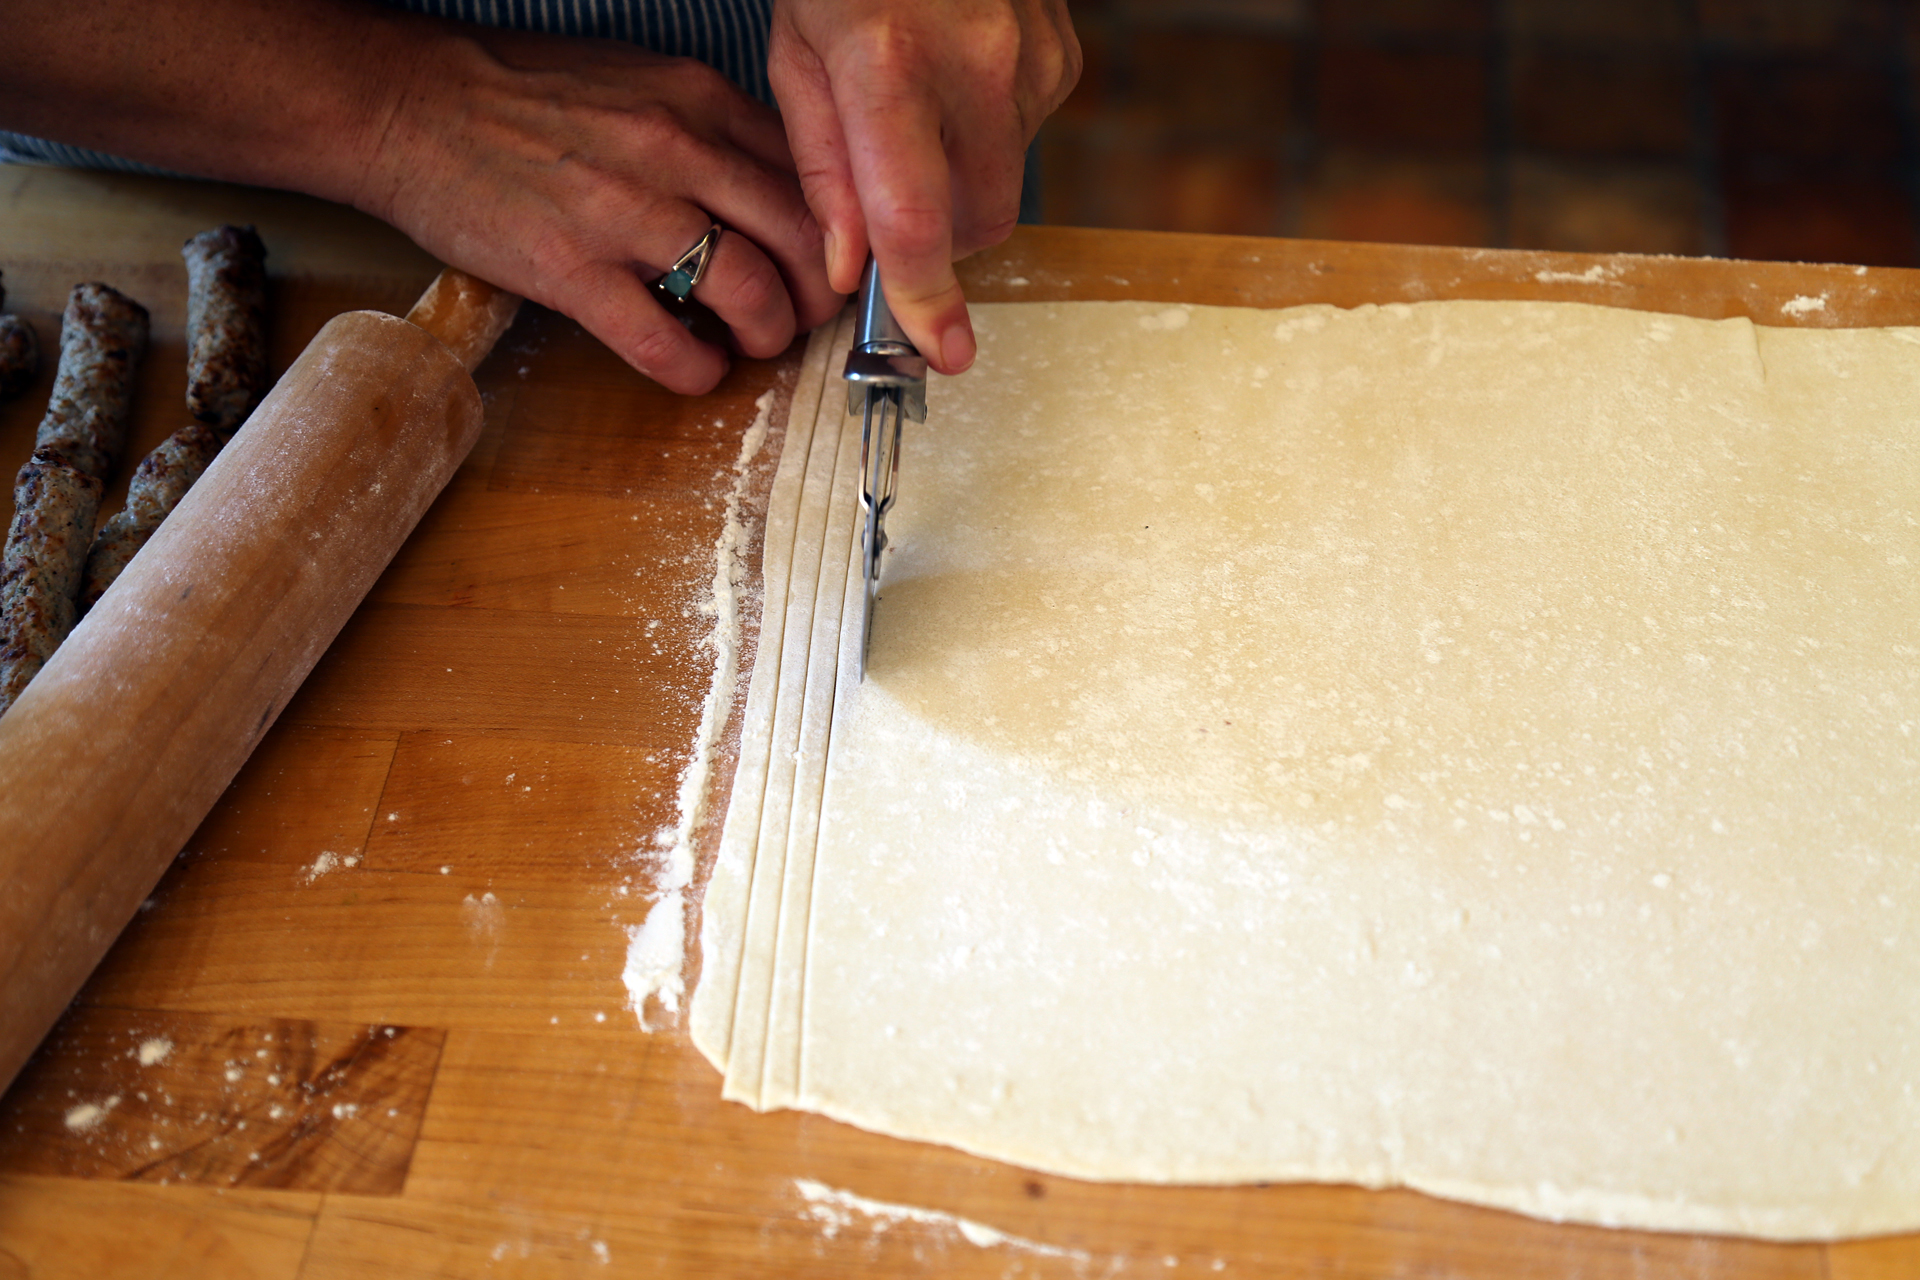 Using a pizza cutter, cut thin, 1/4-inch wide strips down the longer side of the pastry.